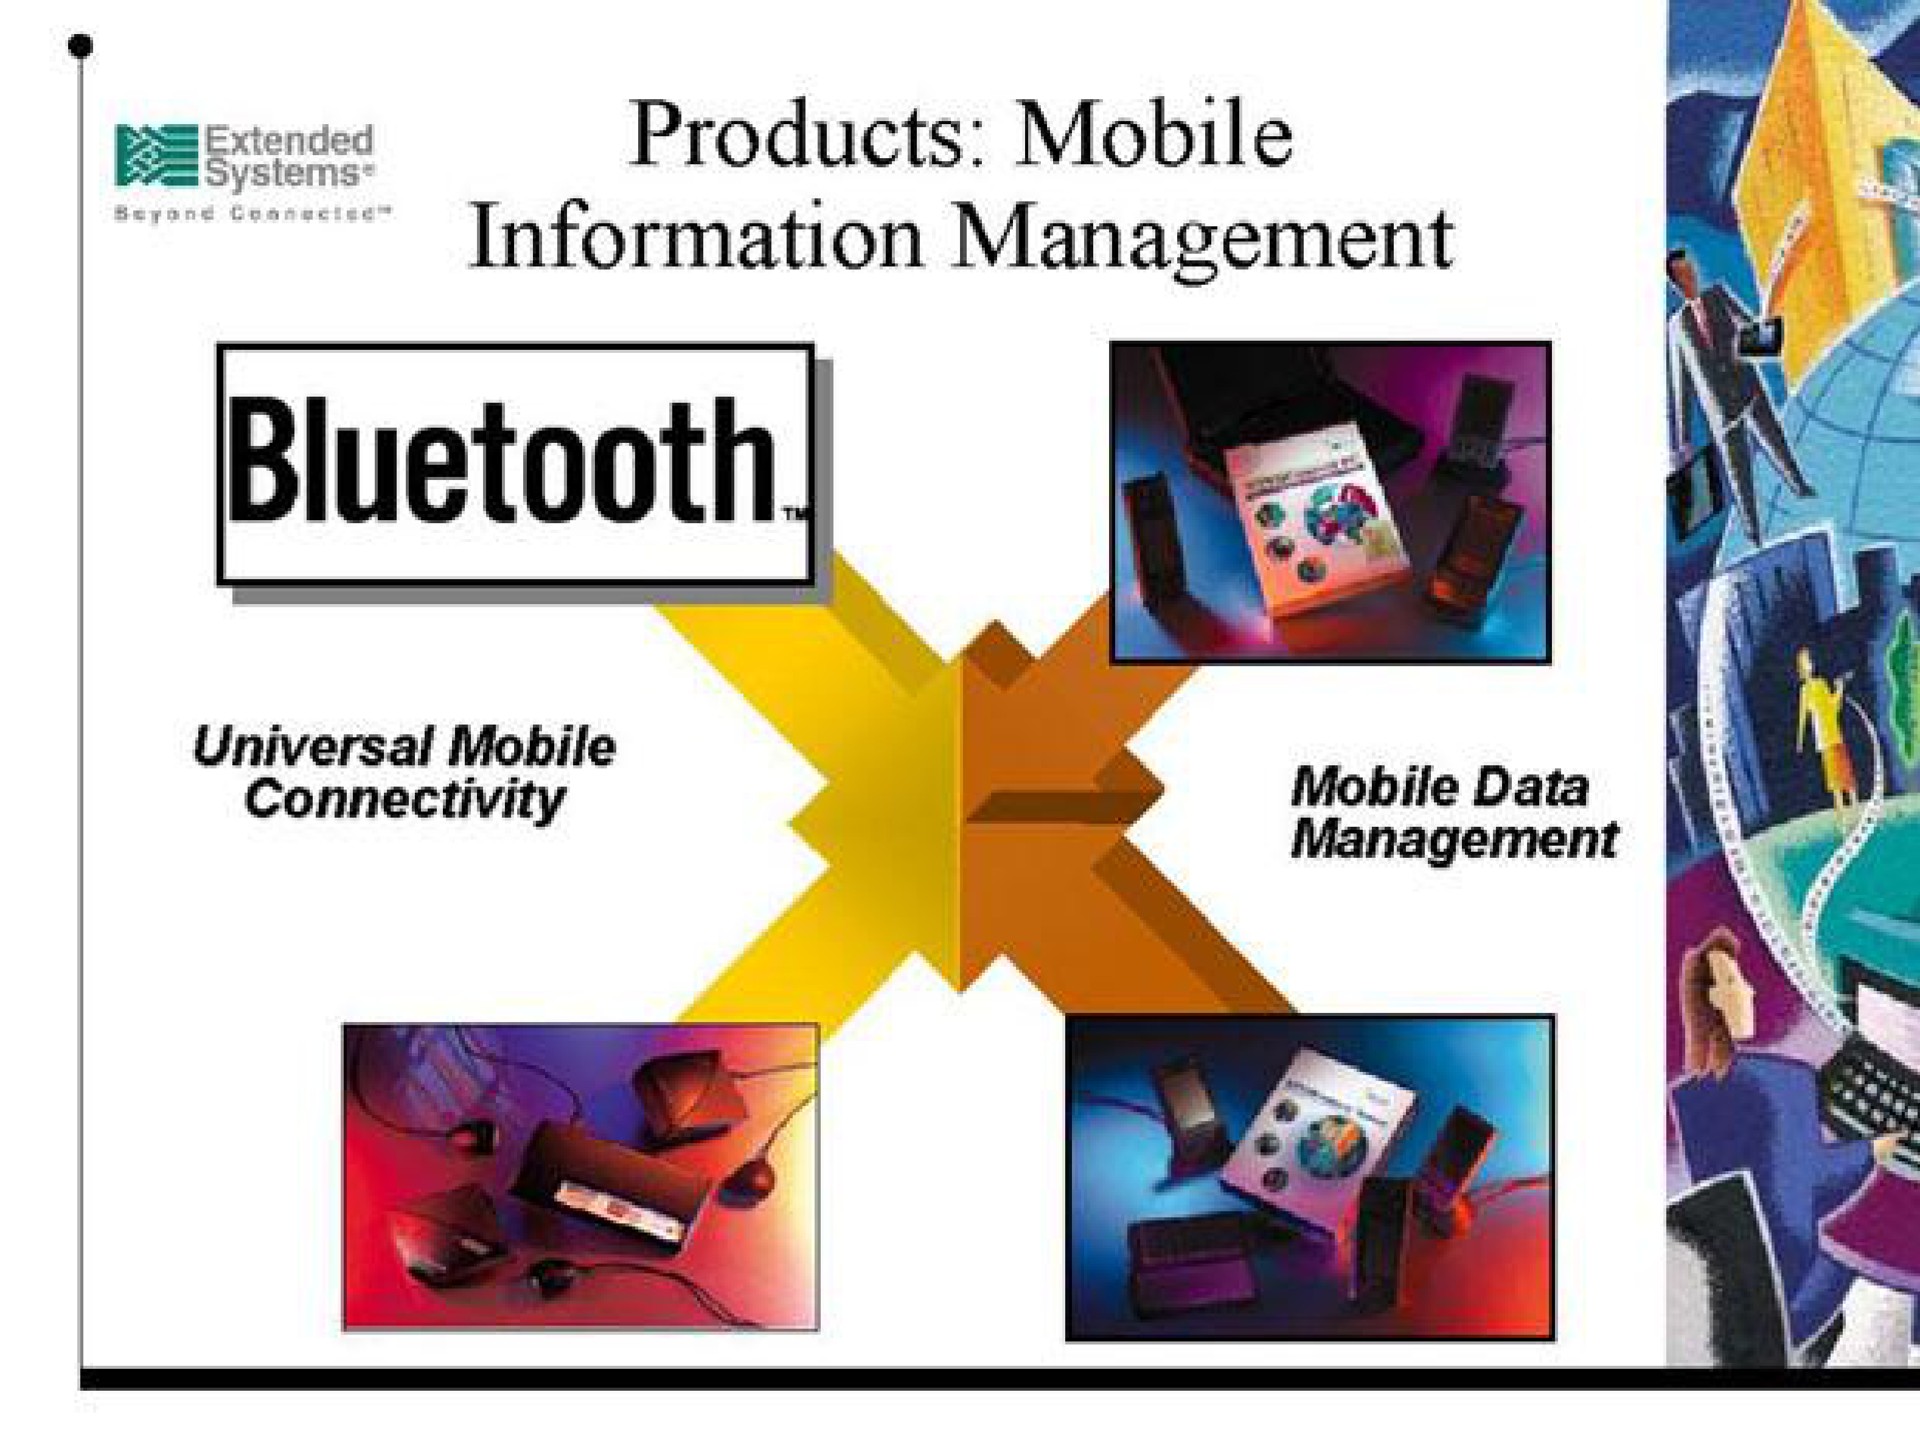 pee extended information management products mobile | Extended Systems